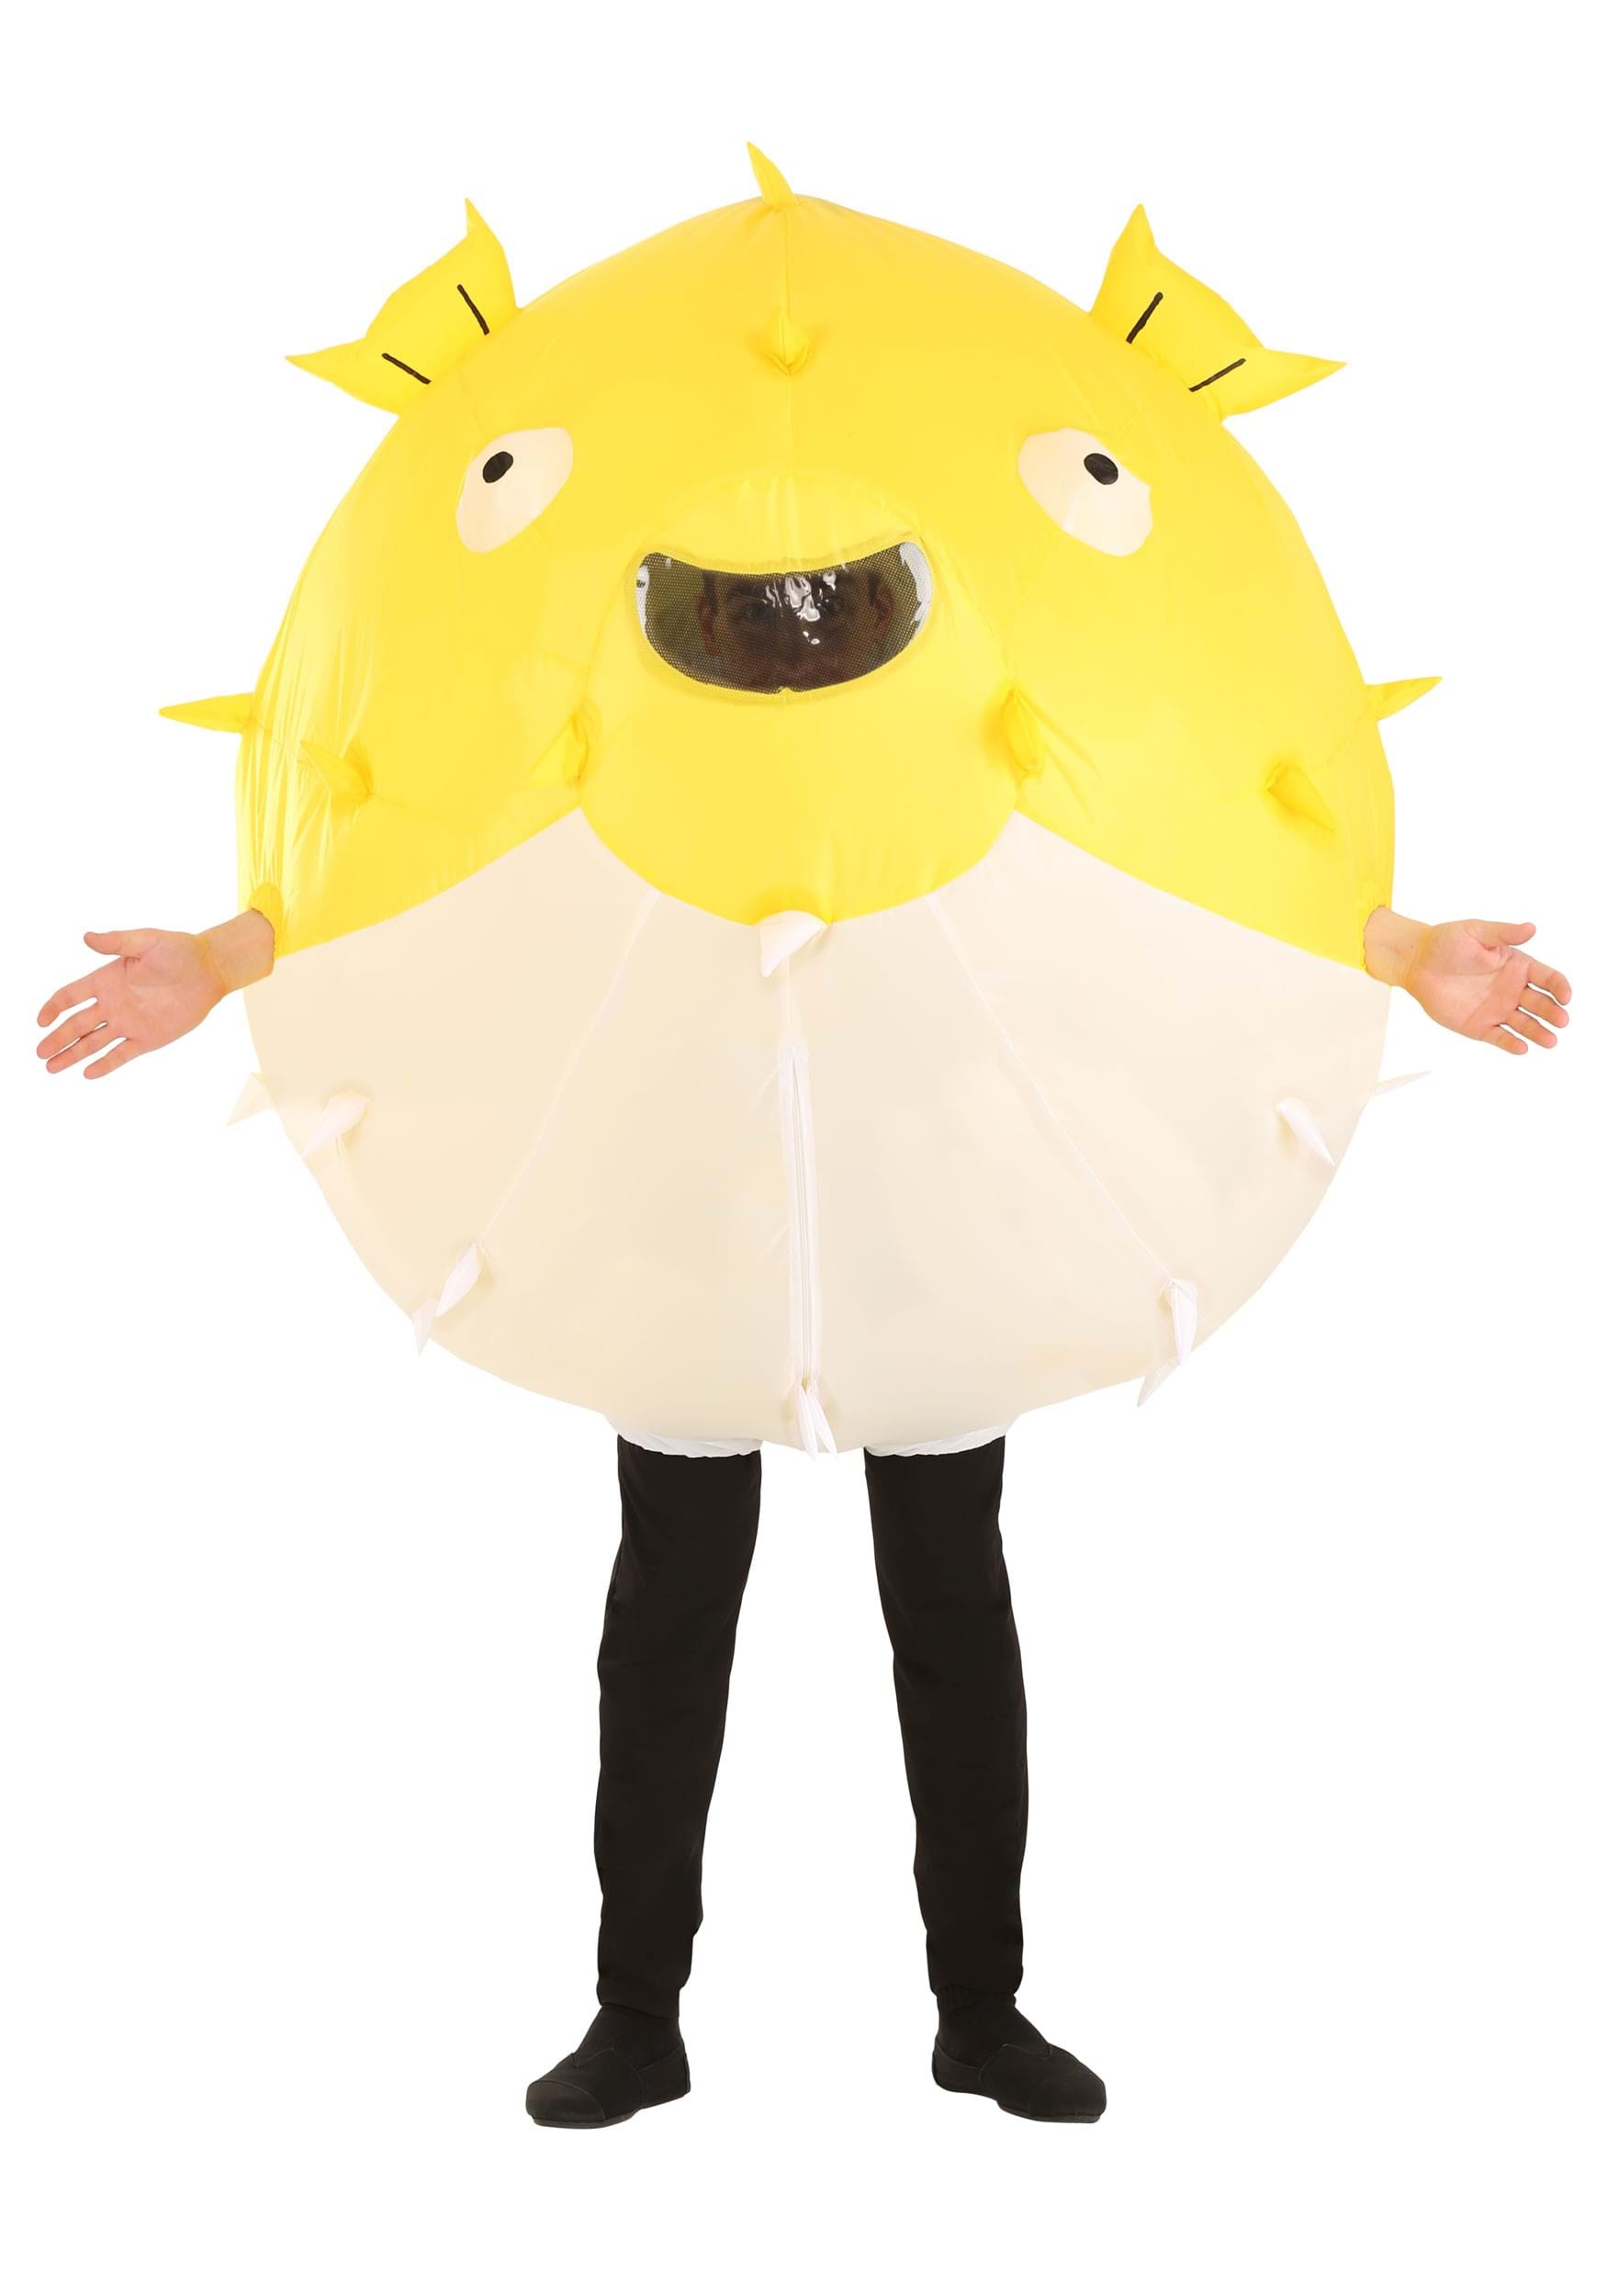 https://images.halloweencostumes.com/products/41557/1-1/adult-inflatable-puffer-fish-costume.jpg